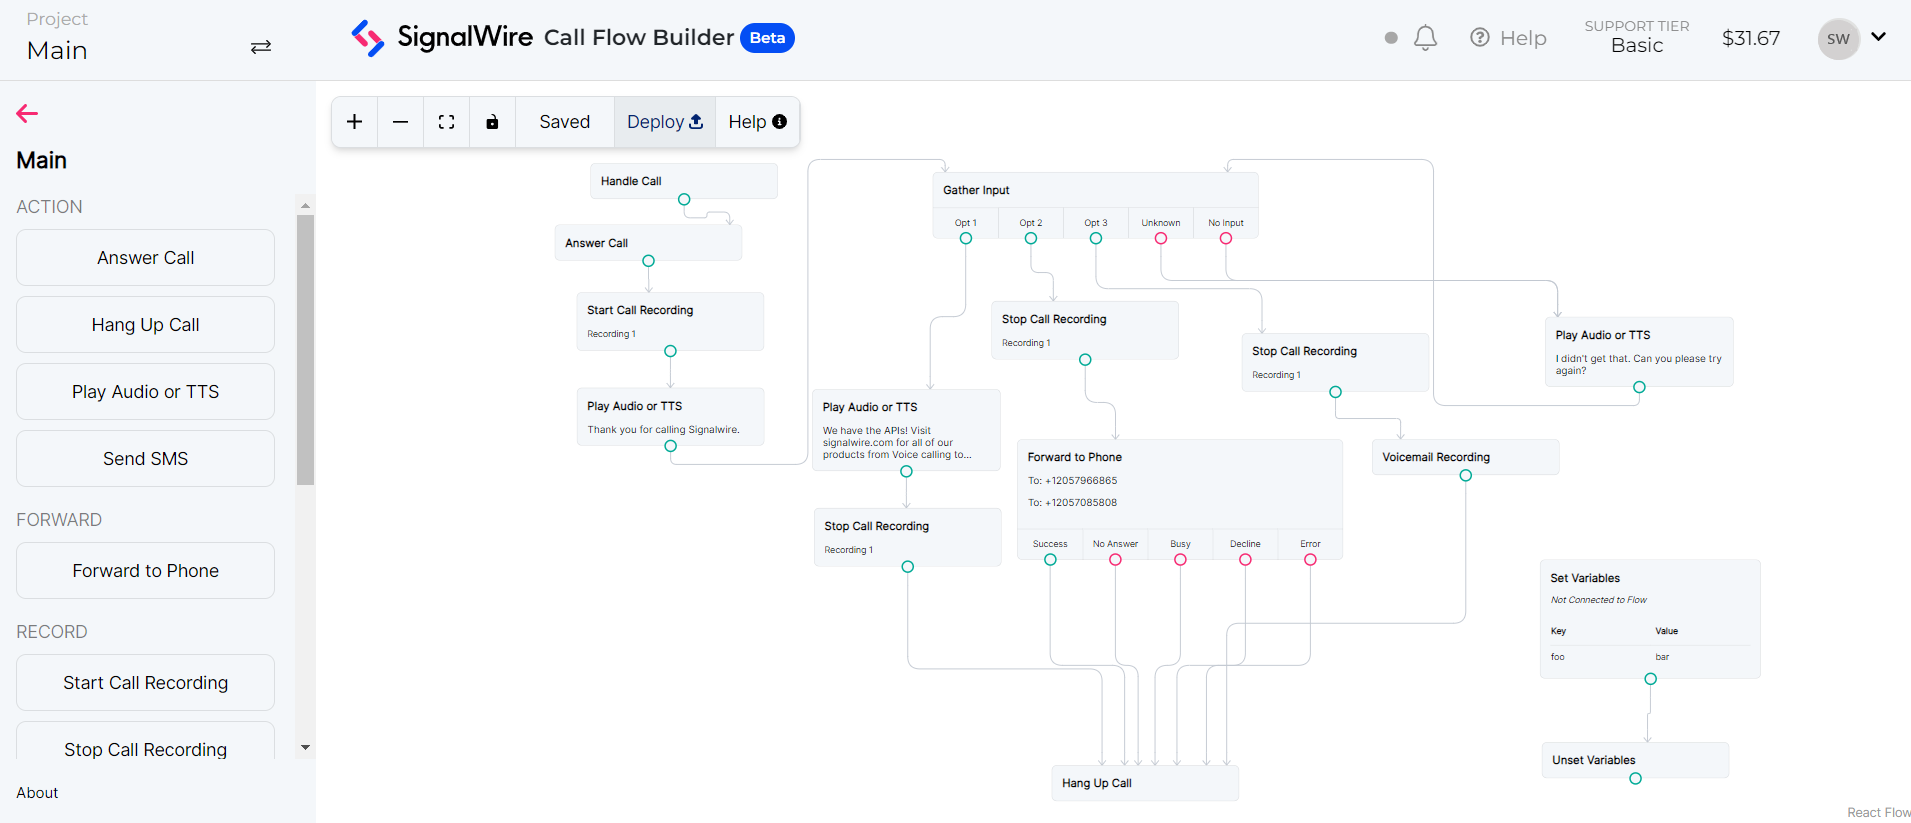 Image of SignalWire Call Flow Builder, show-casing a series of nodes being connected visually to make a call-flow.